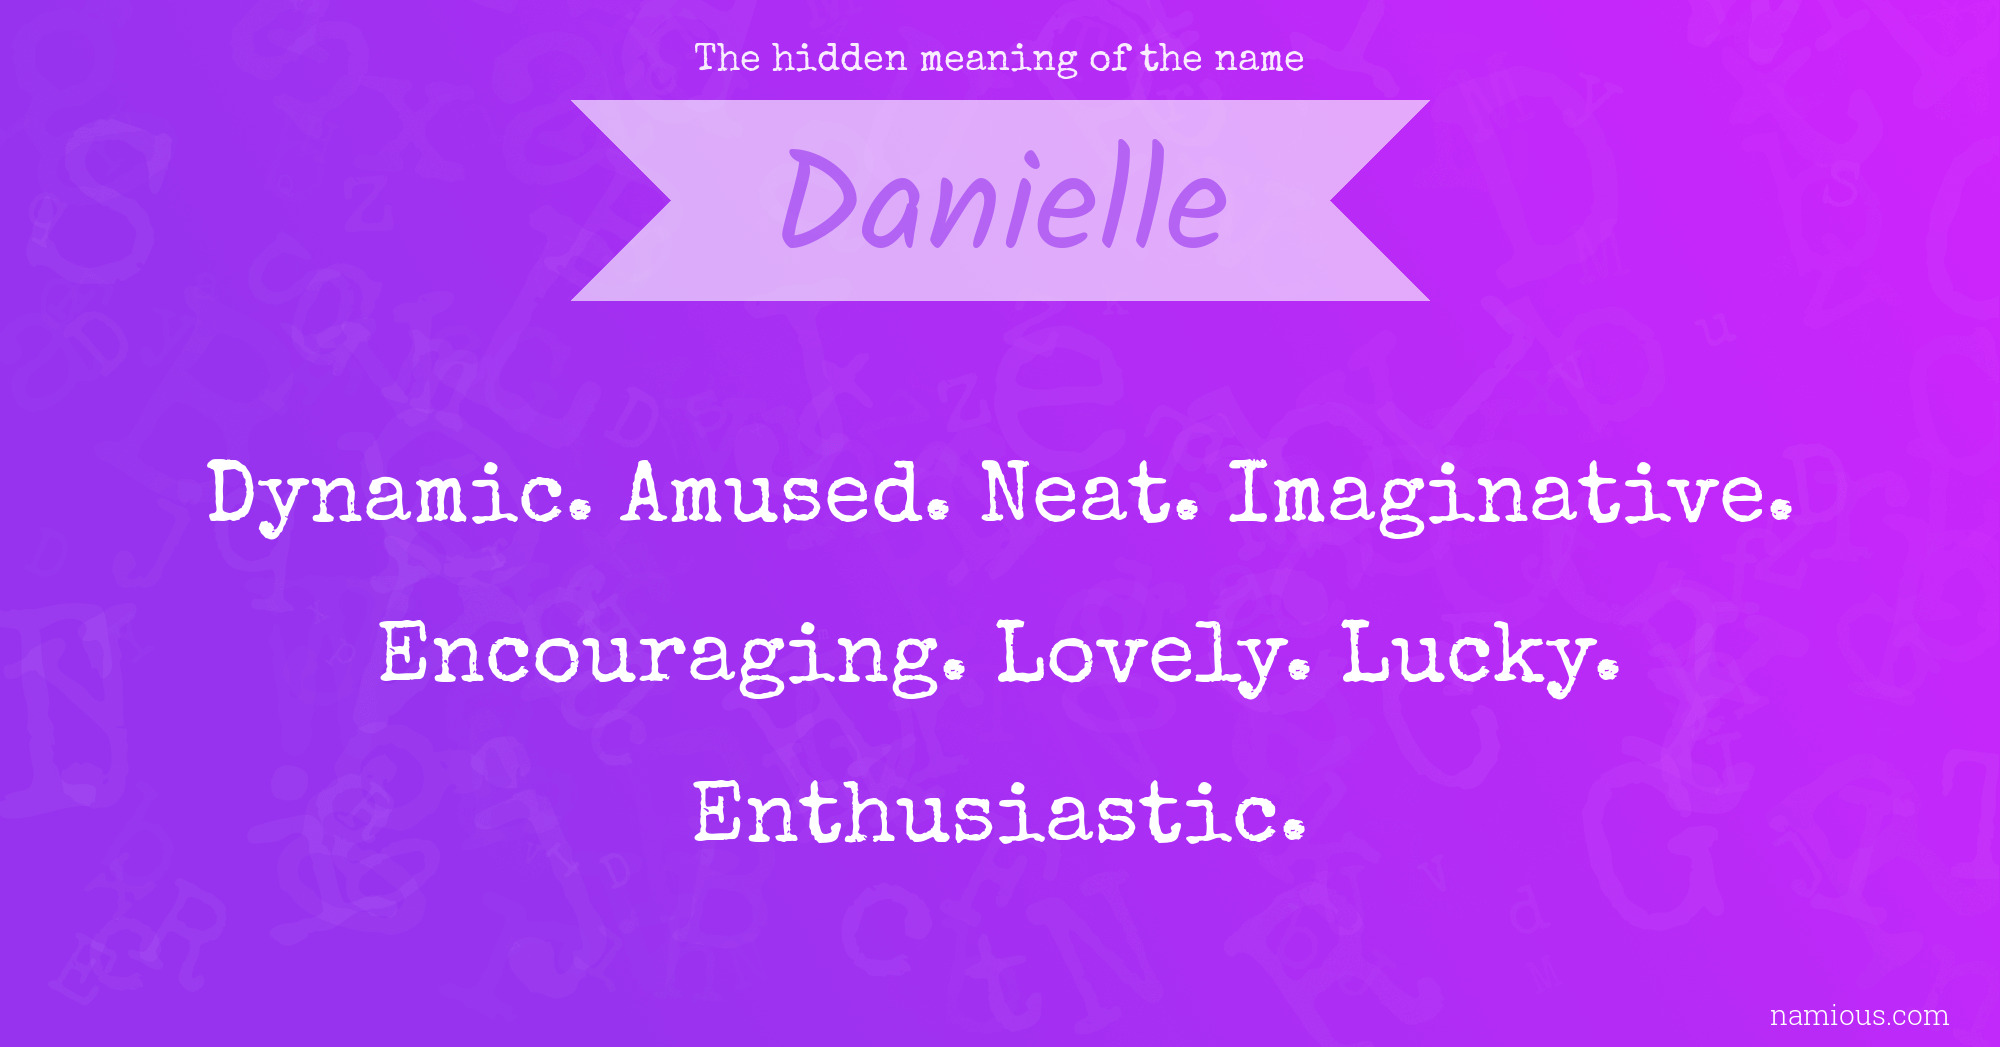 The hidden meaning of the name Danielle